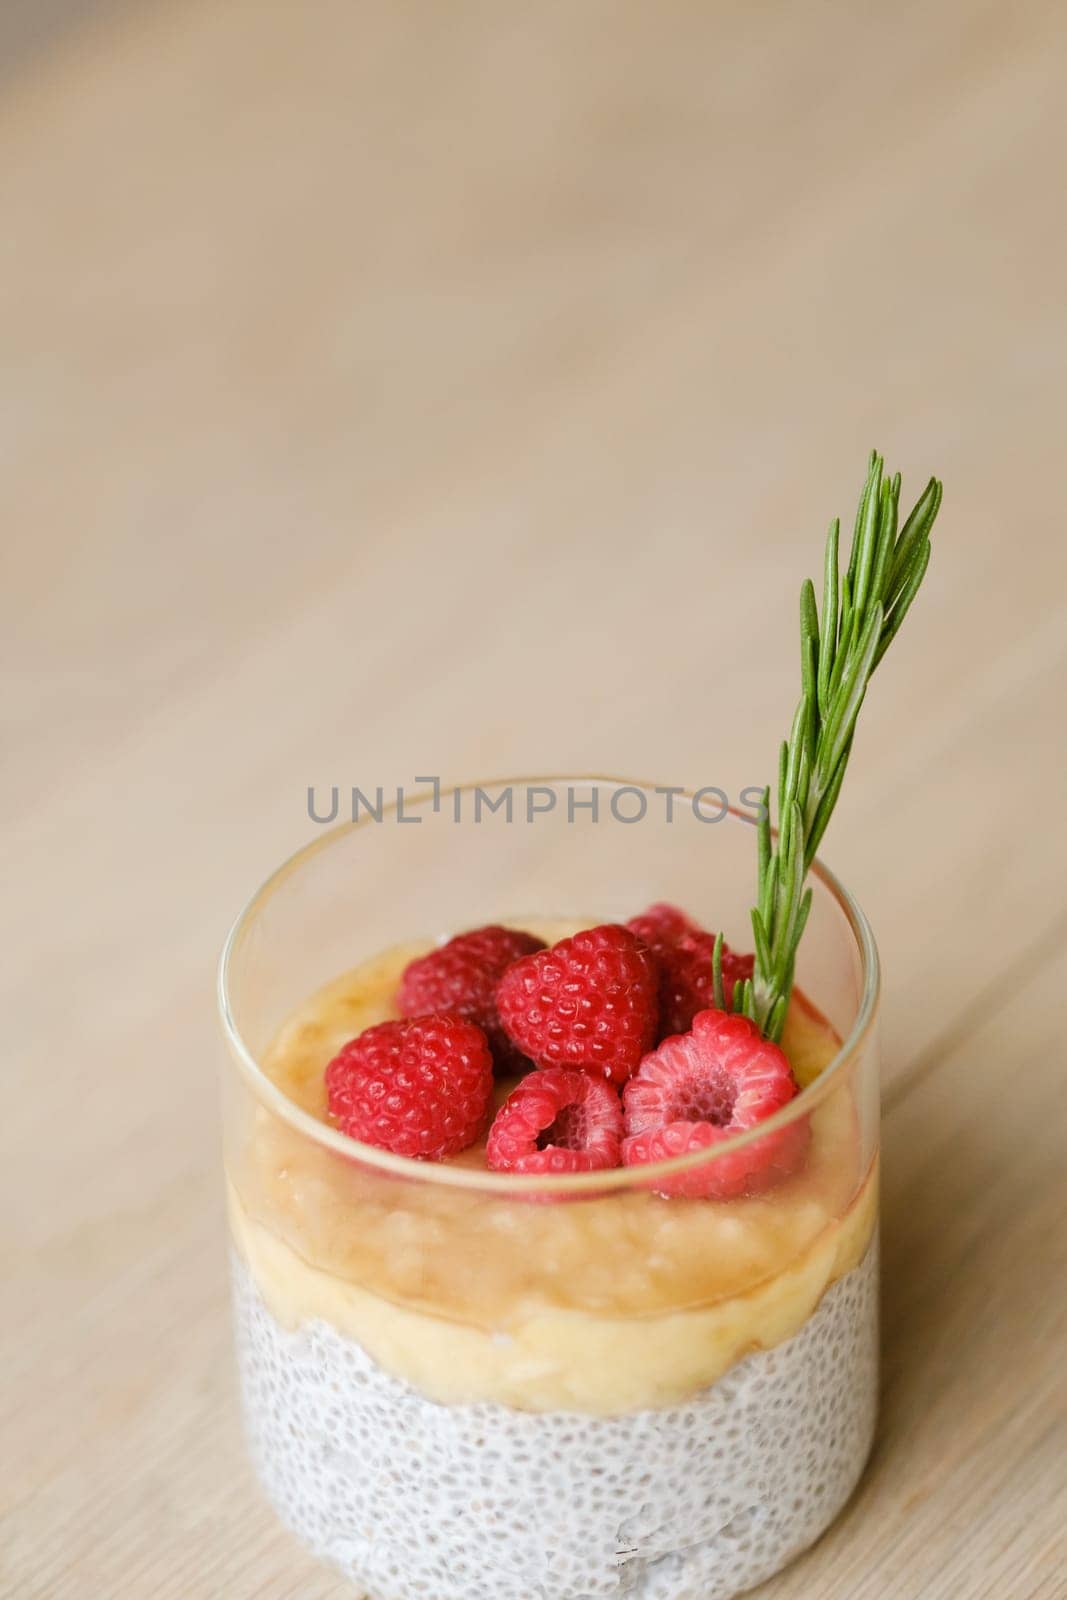 Delicious passion fruit and banana smoothie with raspberries in a glass by Lobachad